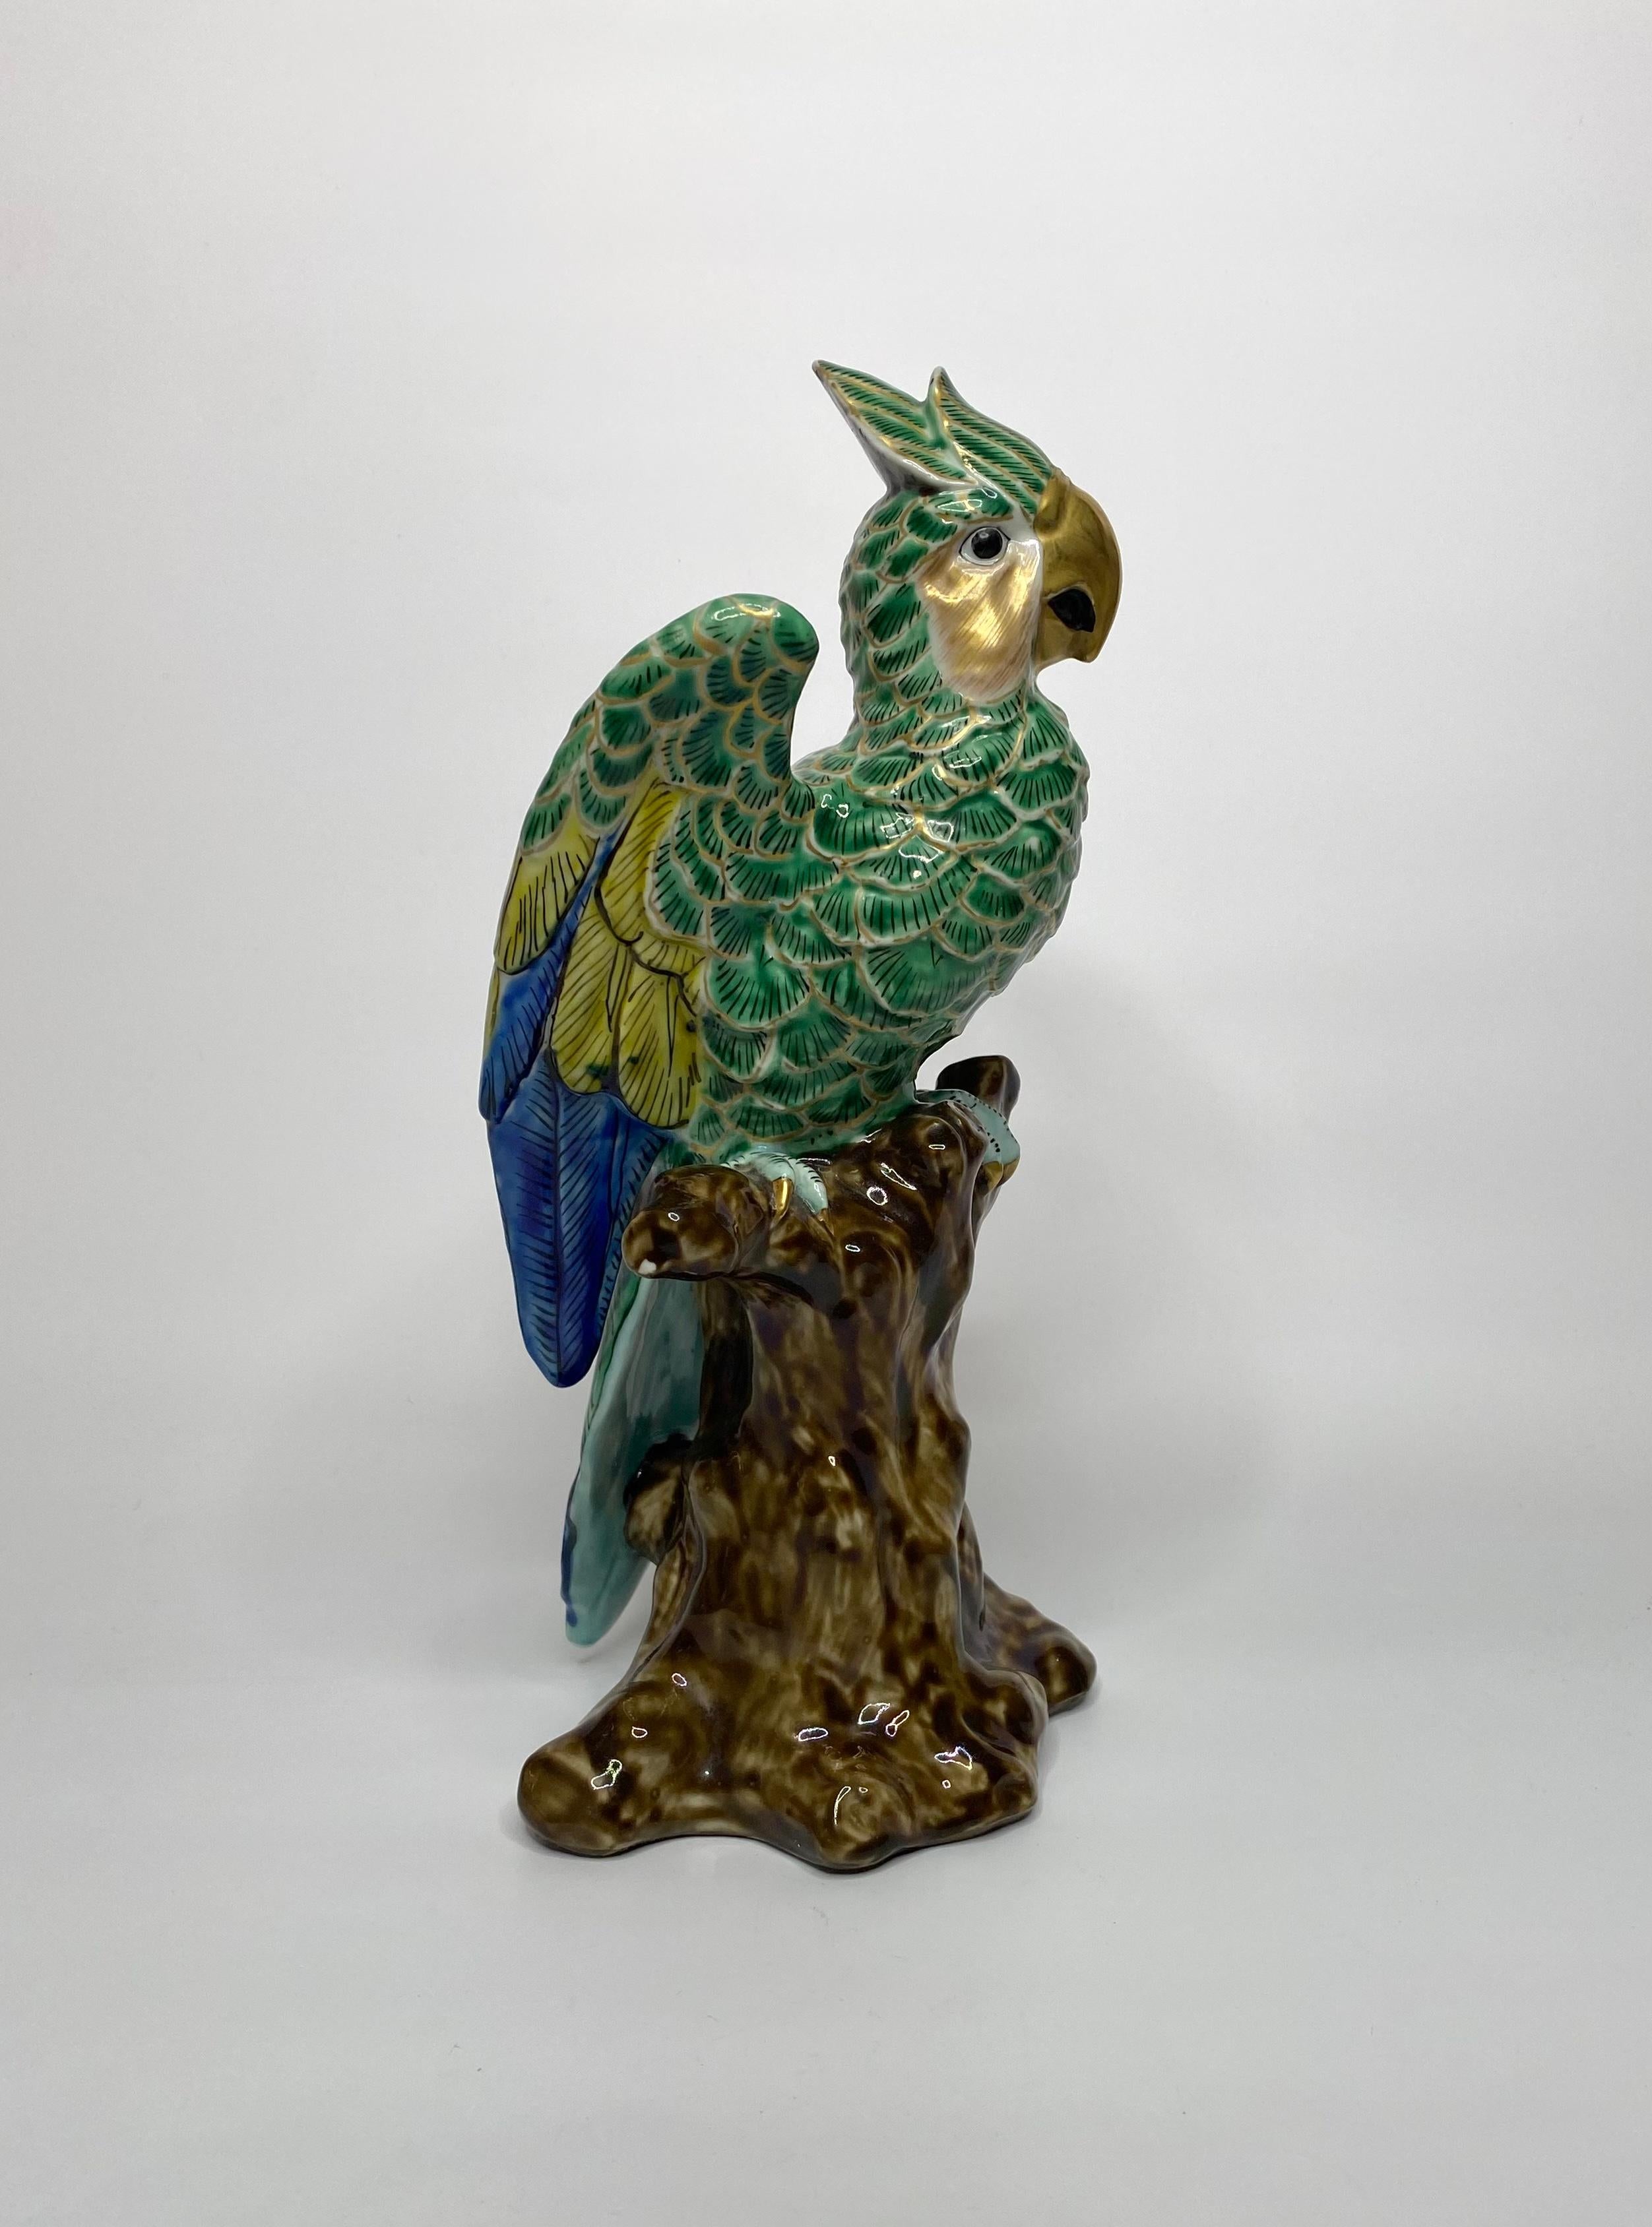 Kutani porcelain okimono of a parrot, Japan, circa 1890, Meiji Period. The brightly enamelled parrot, with his wings open, and having an alert expression on his face. Perched upon a large tree stump.
Measures: Height: 31.5 cm, 12 3/8”.
Width: 18